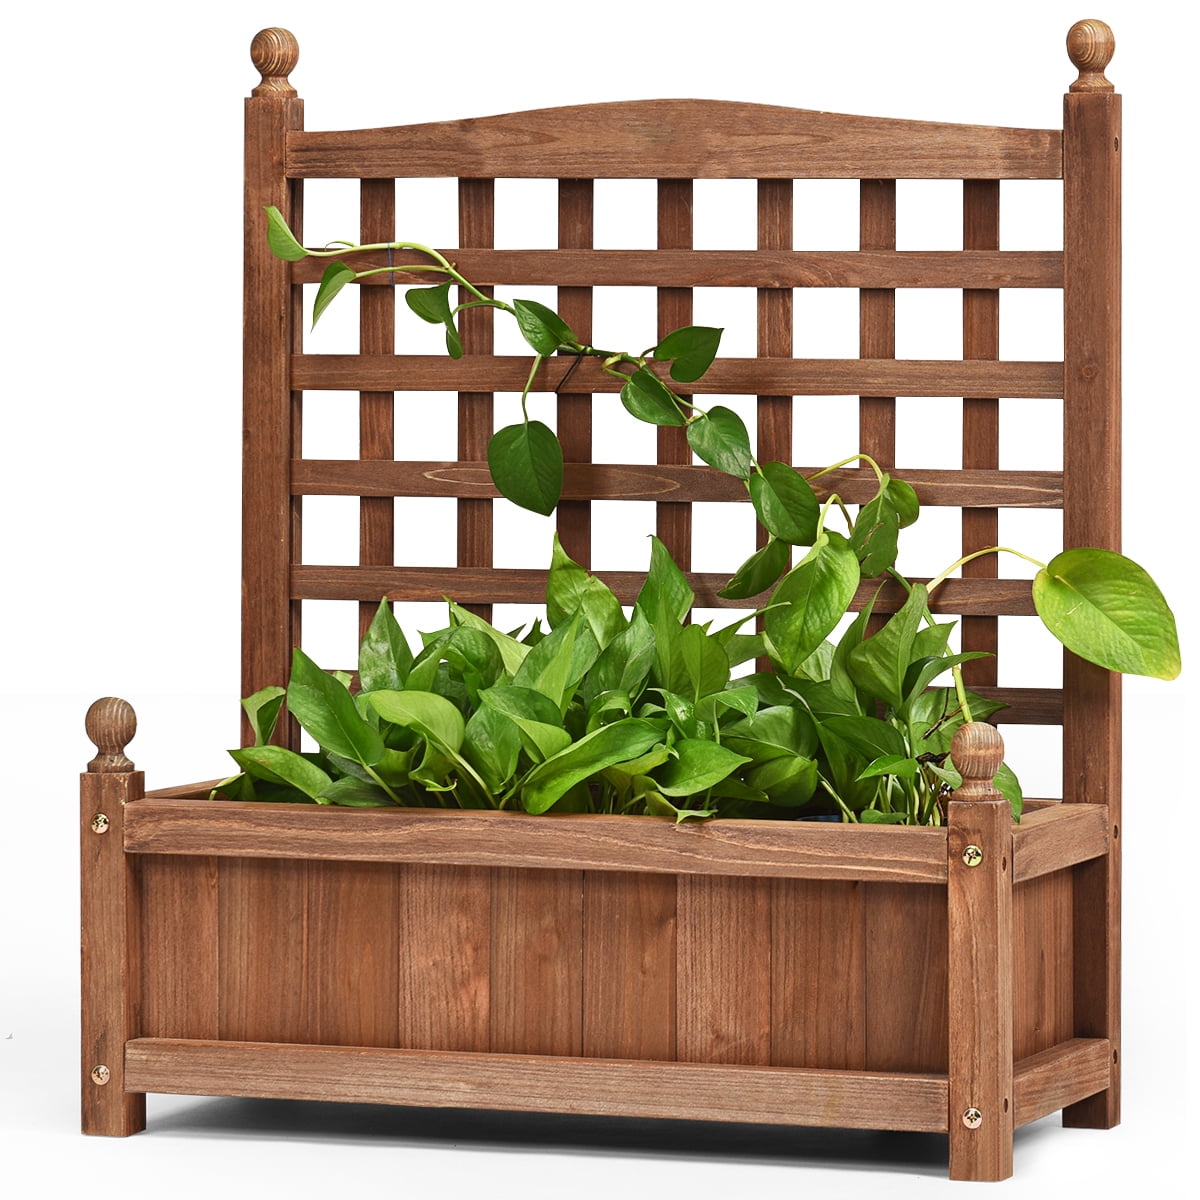 outdoor wooden plant box flower plant growing box holder